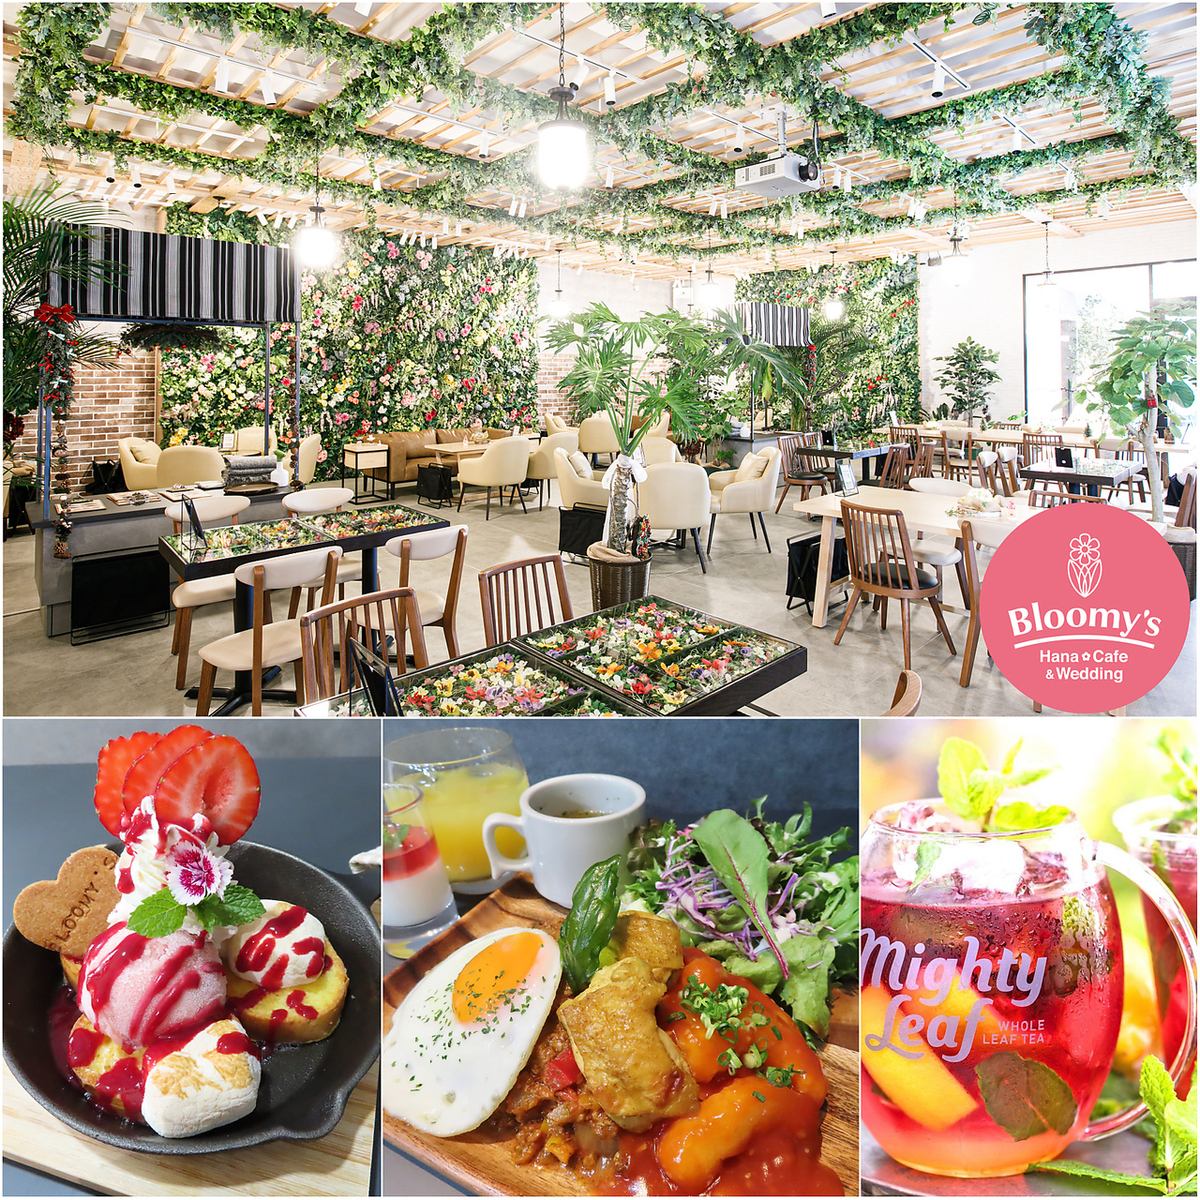 [Designer's space surrounded by flowers and greenery] Delicious lunch and relaxing space